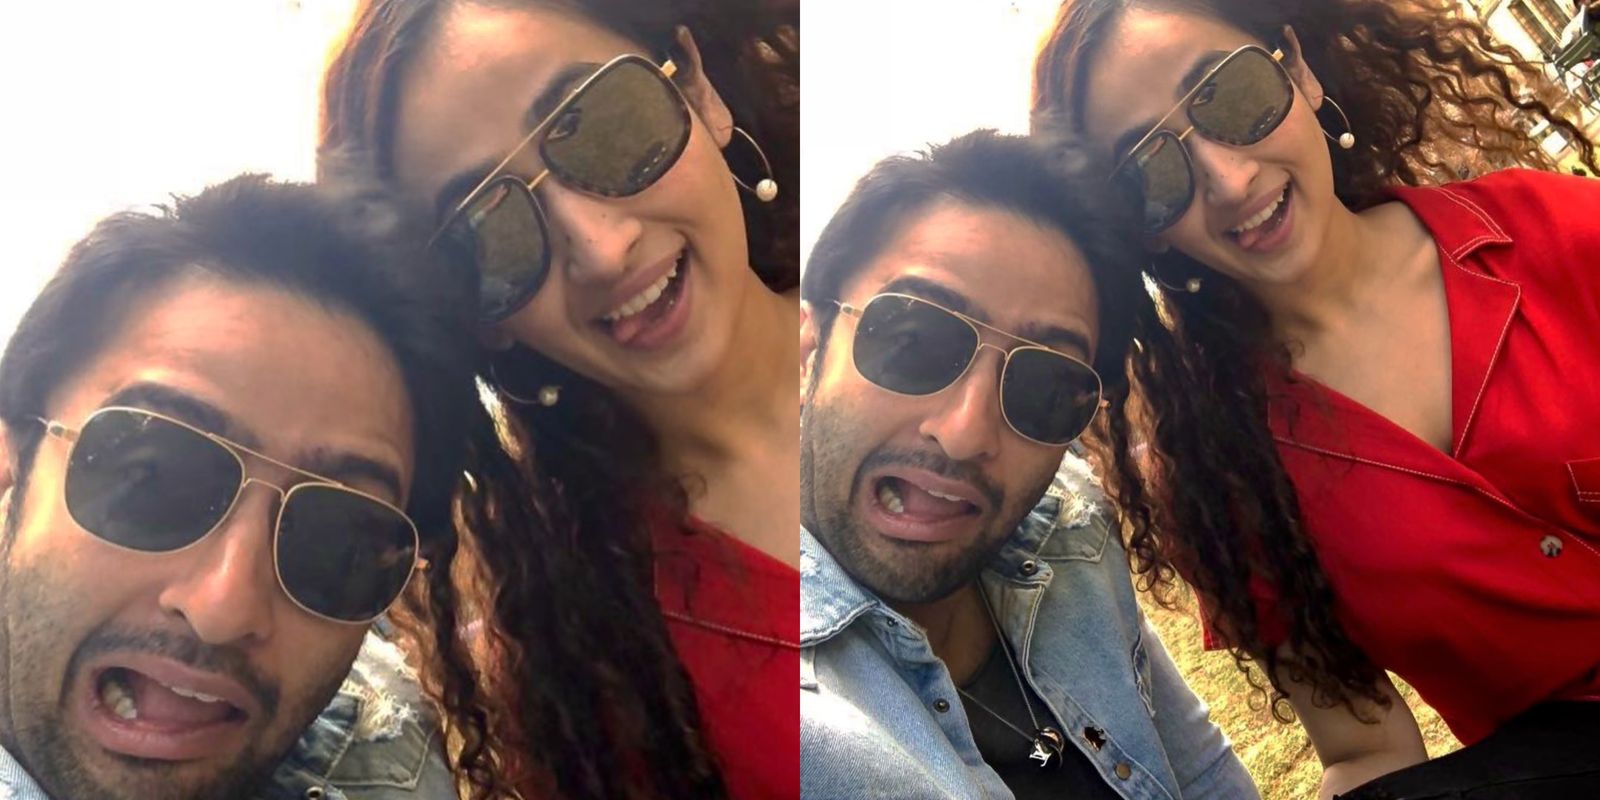 Tired Of Their Morphed Photos Shaheer Sheikh Makes His Relationship With Ruchika Kapoor Official With A Goofy Picture